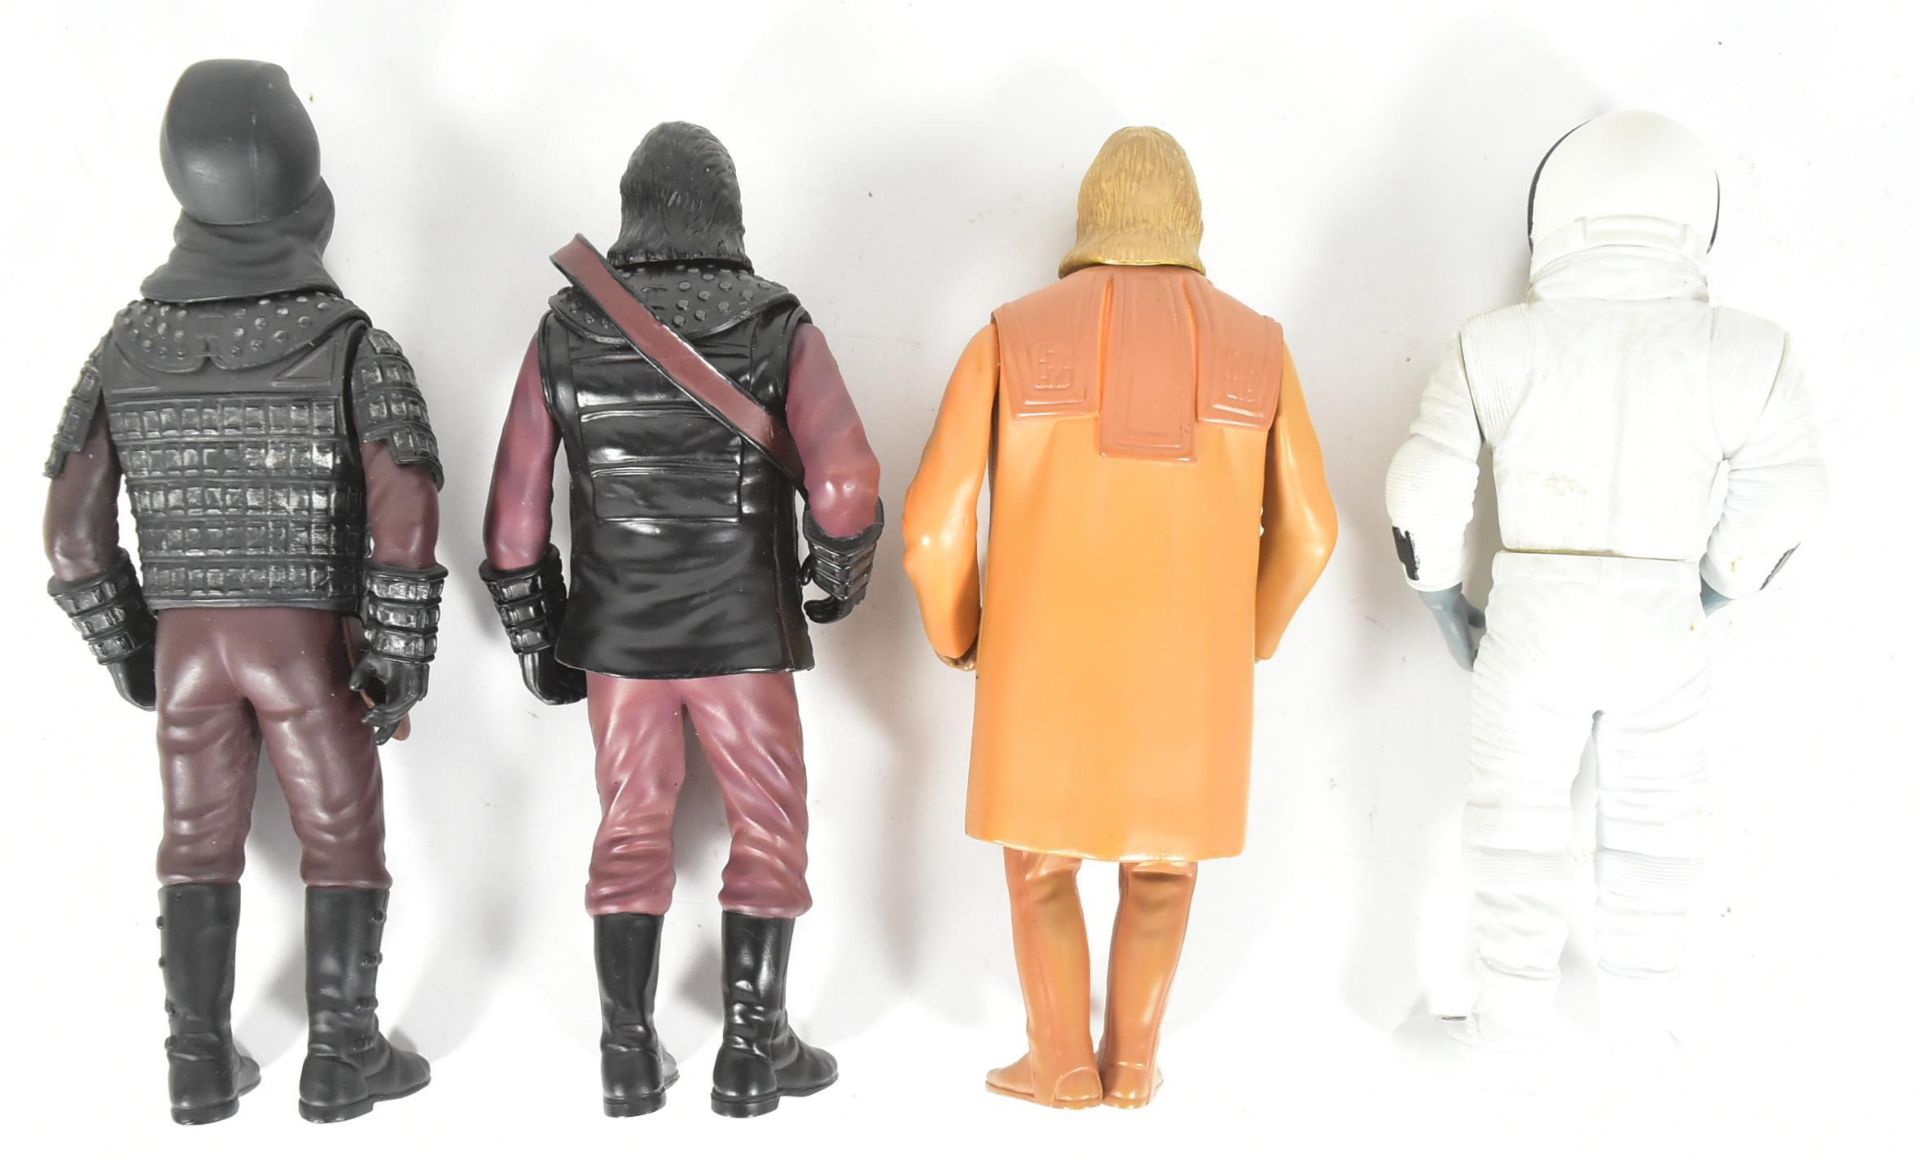 PLANET OF THE APES - MEDICOM - COLLECTION OF ACTION FIGURES - Image 4 of 4